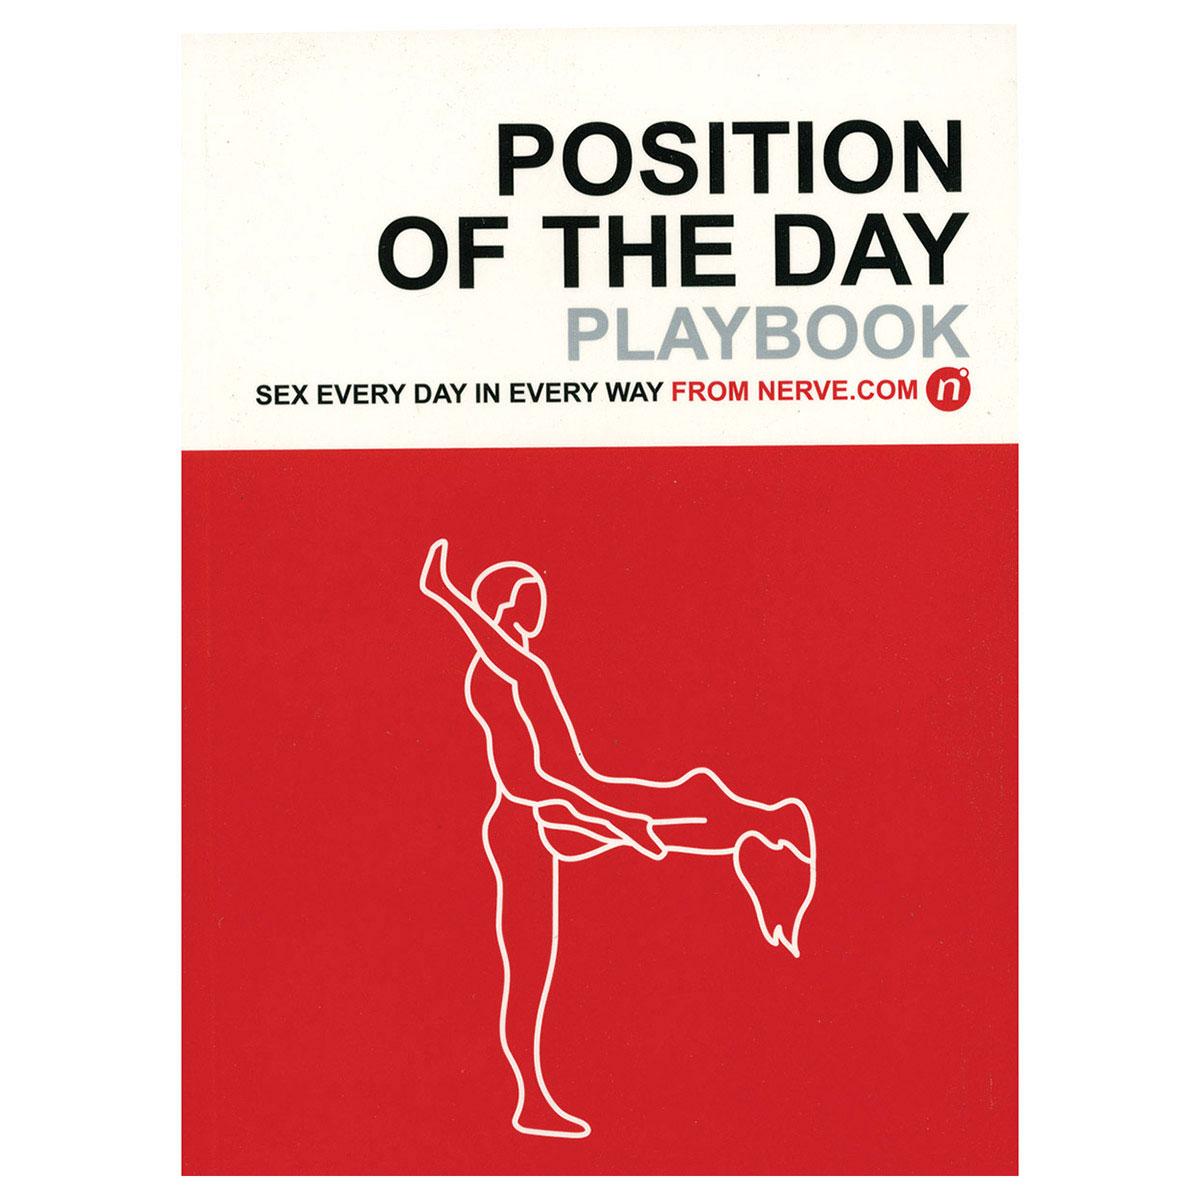 Position of the Day Playbook - Books and Games